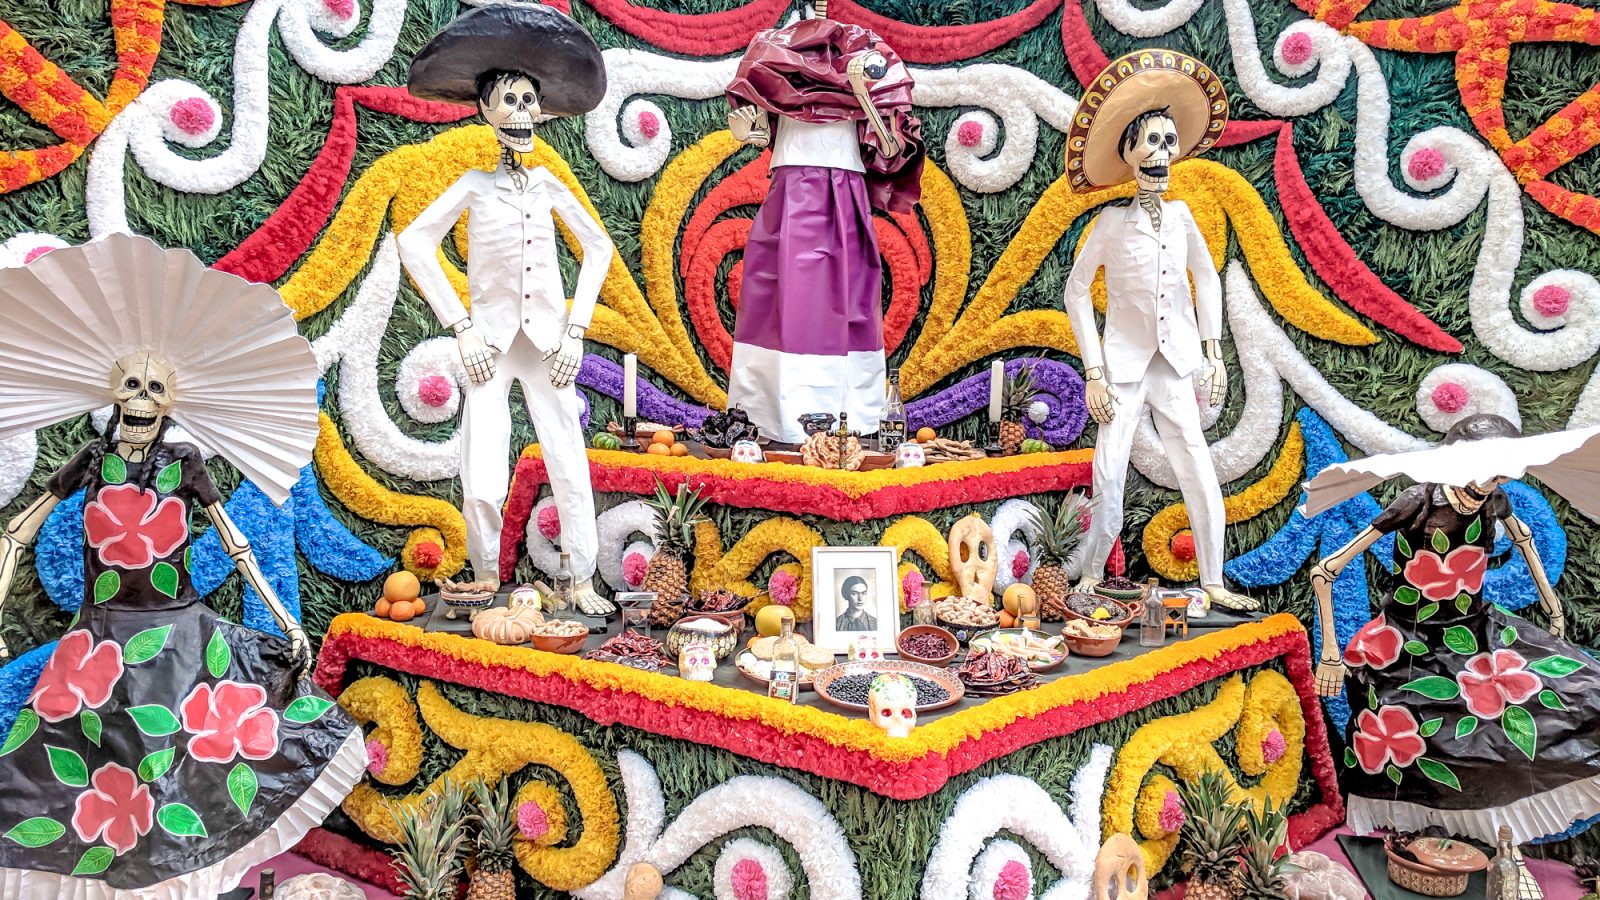 Do This, Not That // Celebrating Day of the Dead in Mexico for First-Timers | Día de los Muertos, what to wear for day of the dead, where to experience day of the dead in mexico, cultural significance, traditions, dos and don'ts, tips